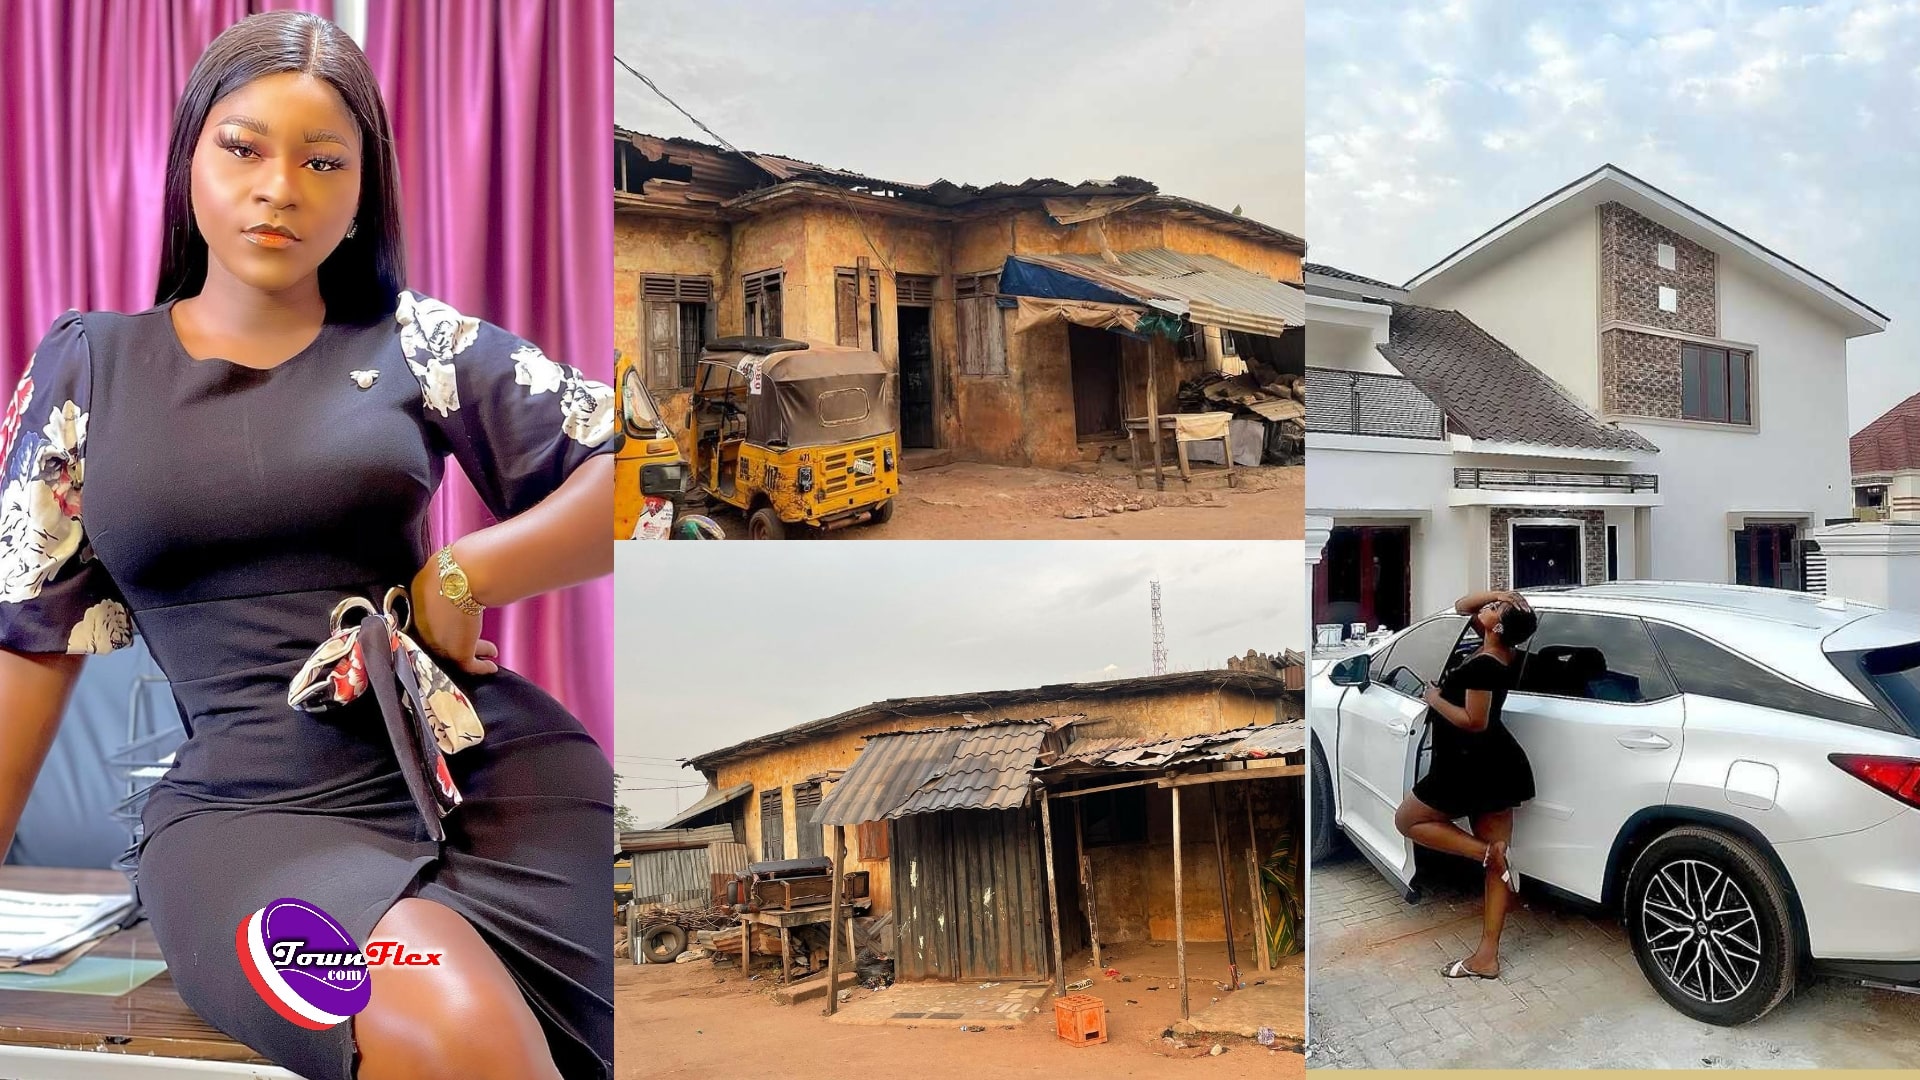 Destiny Etiko In Tears As She Compares Childhood Home With Where She Lives Now [See Photos]